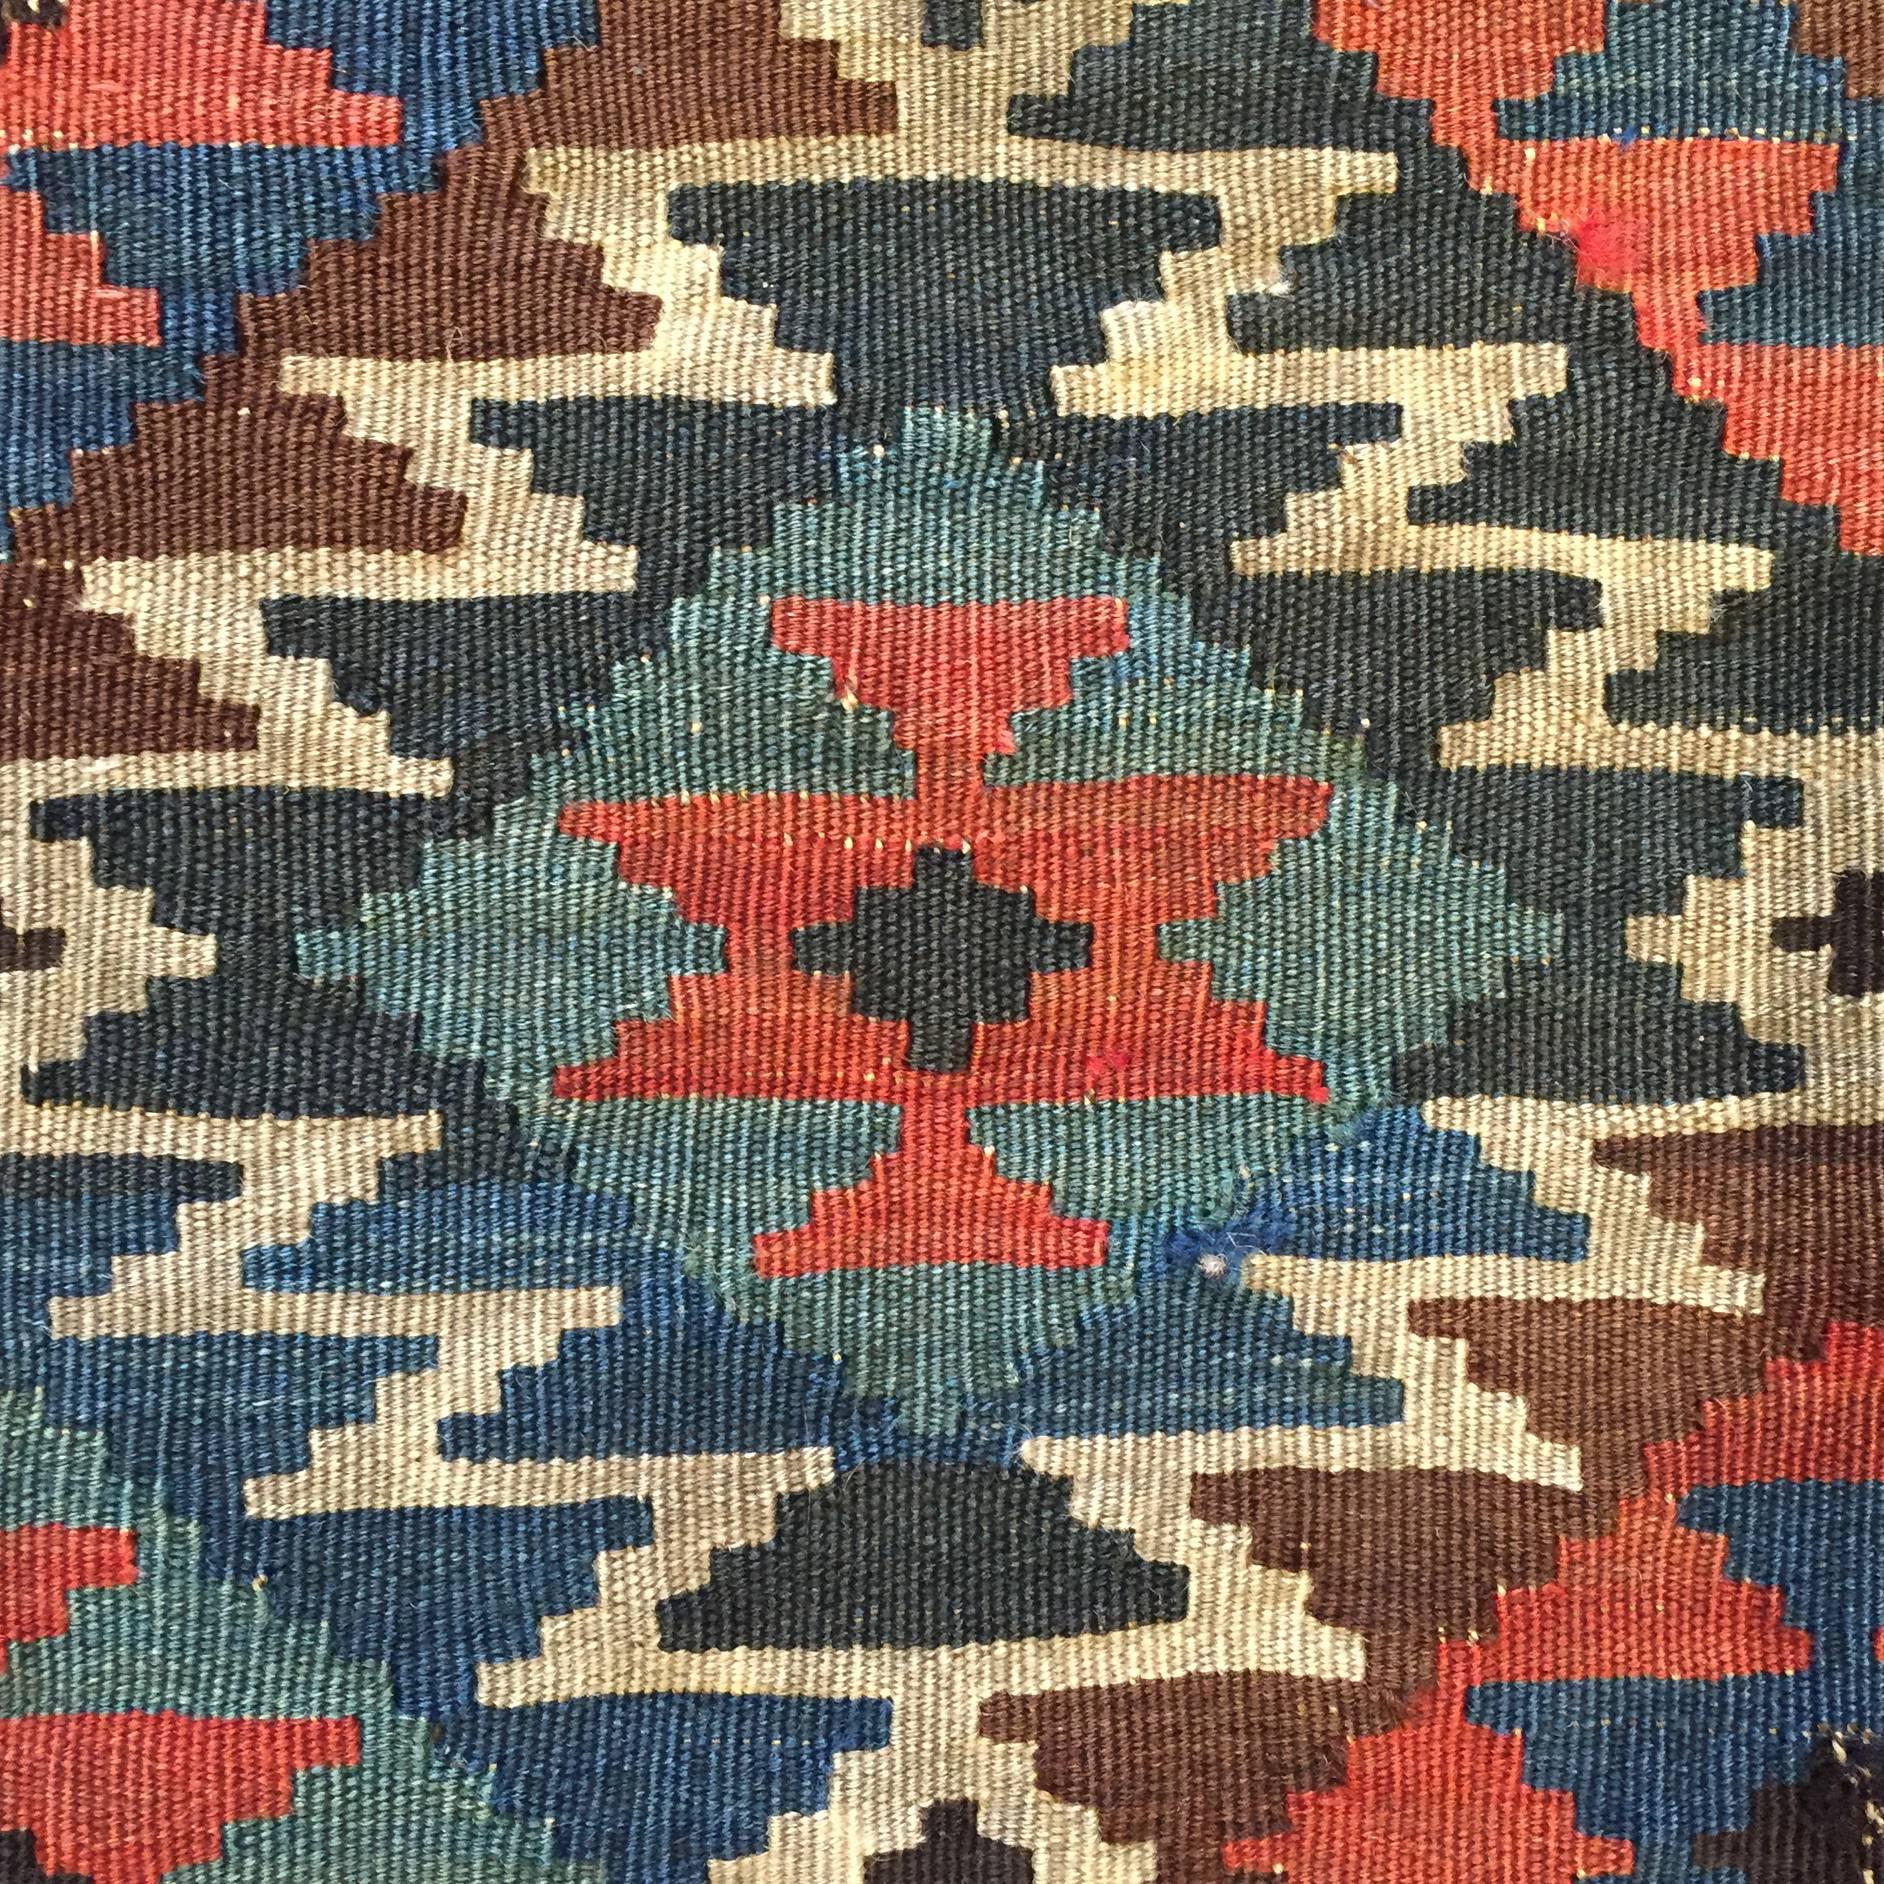 An early 20th century, Azerbaijani, Shahsavan Kilim rug with a traditional crimson, sage green and indigo diamond pattern with natural colored zig-zag diagonals, surrounded by a complimentary colored border.